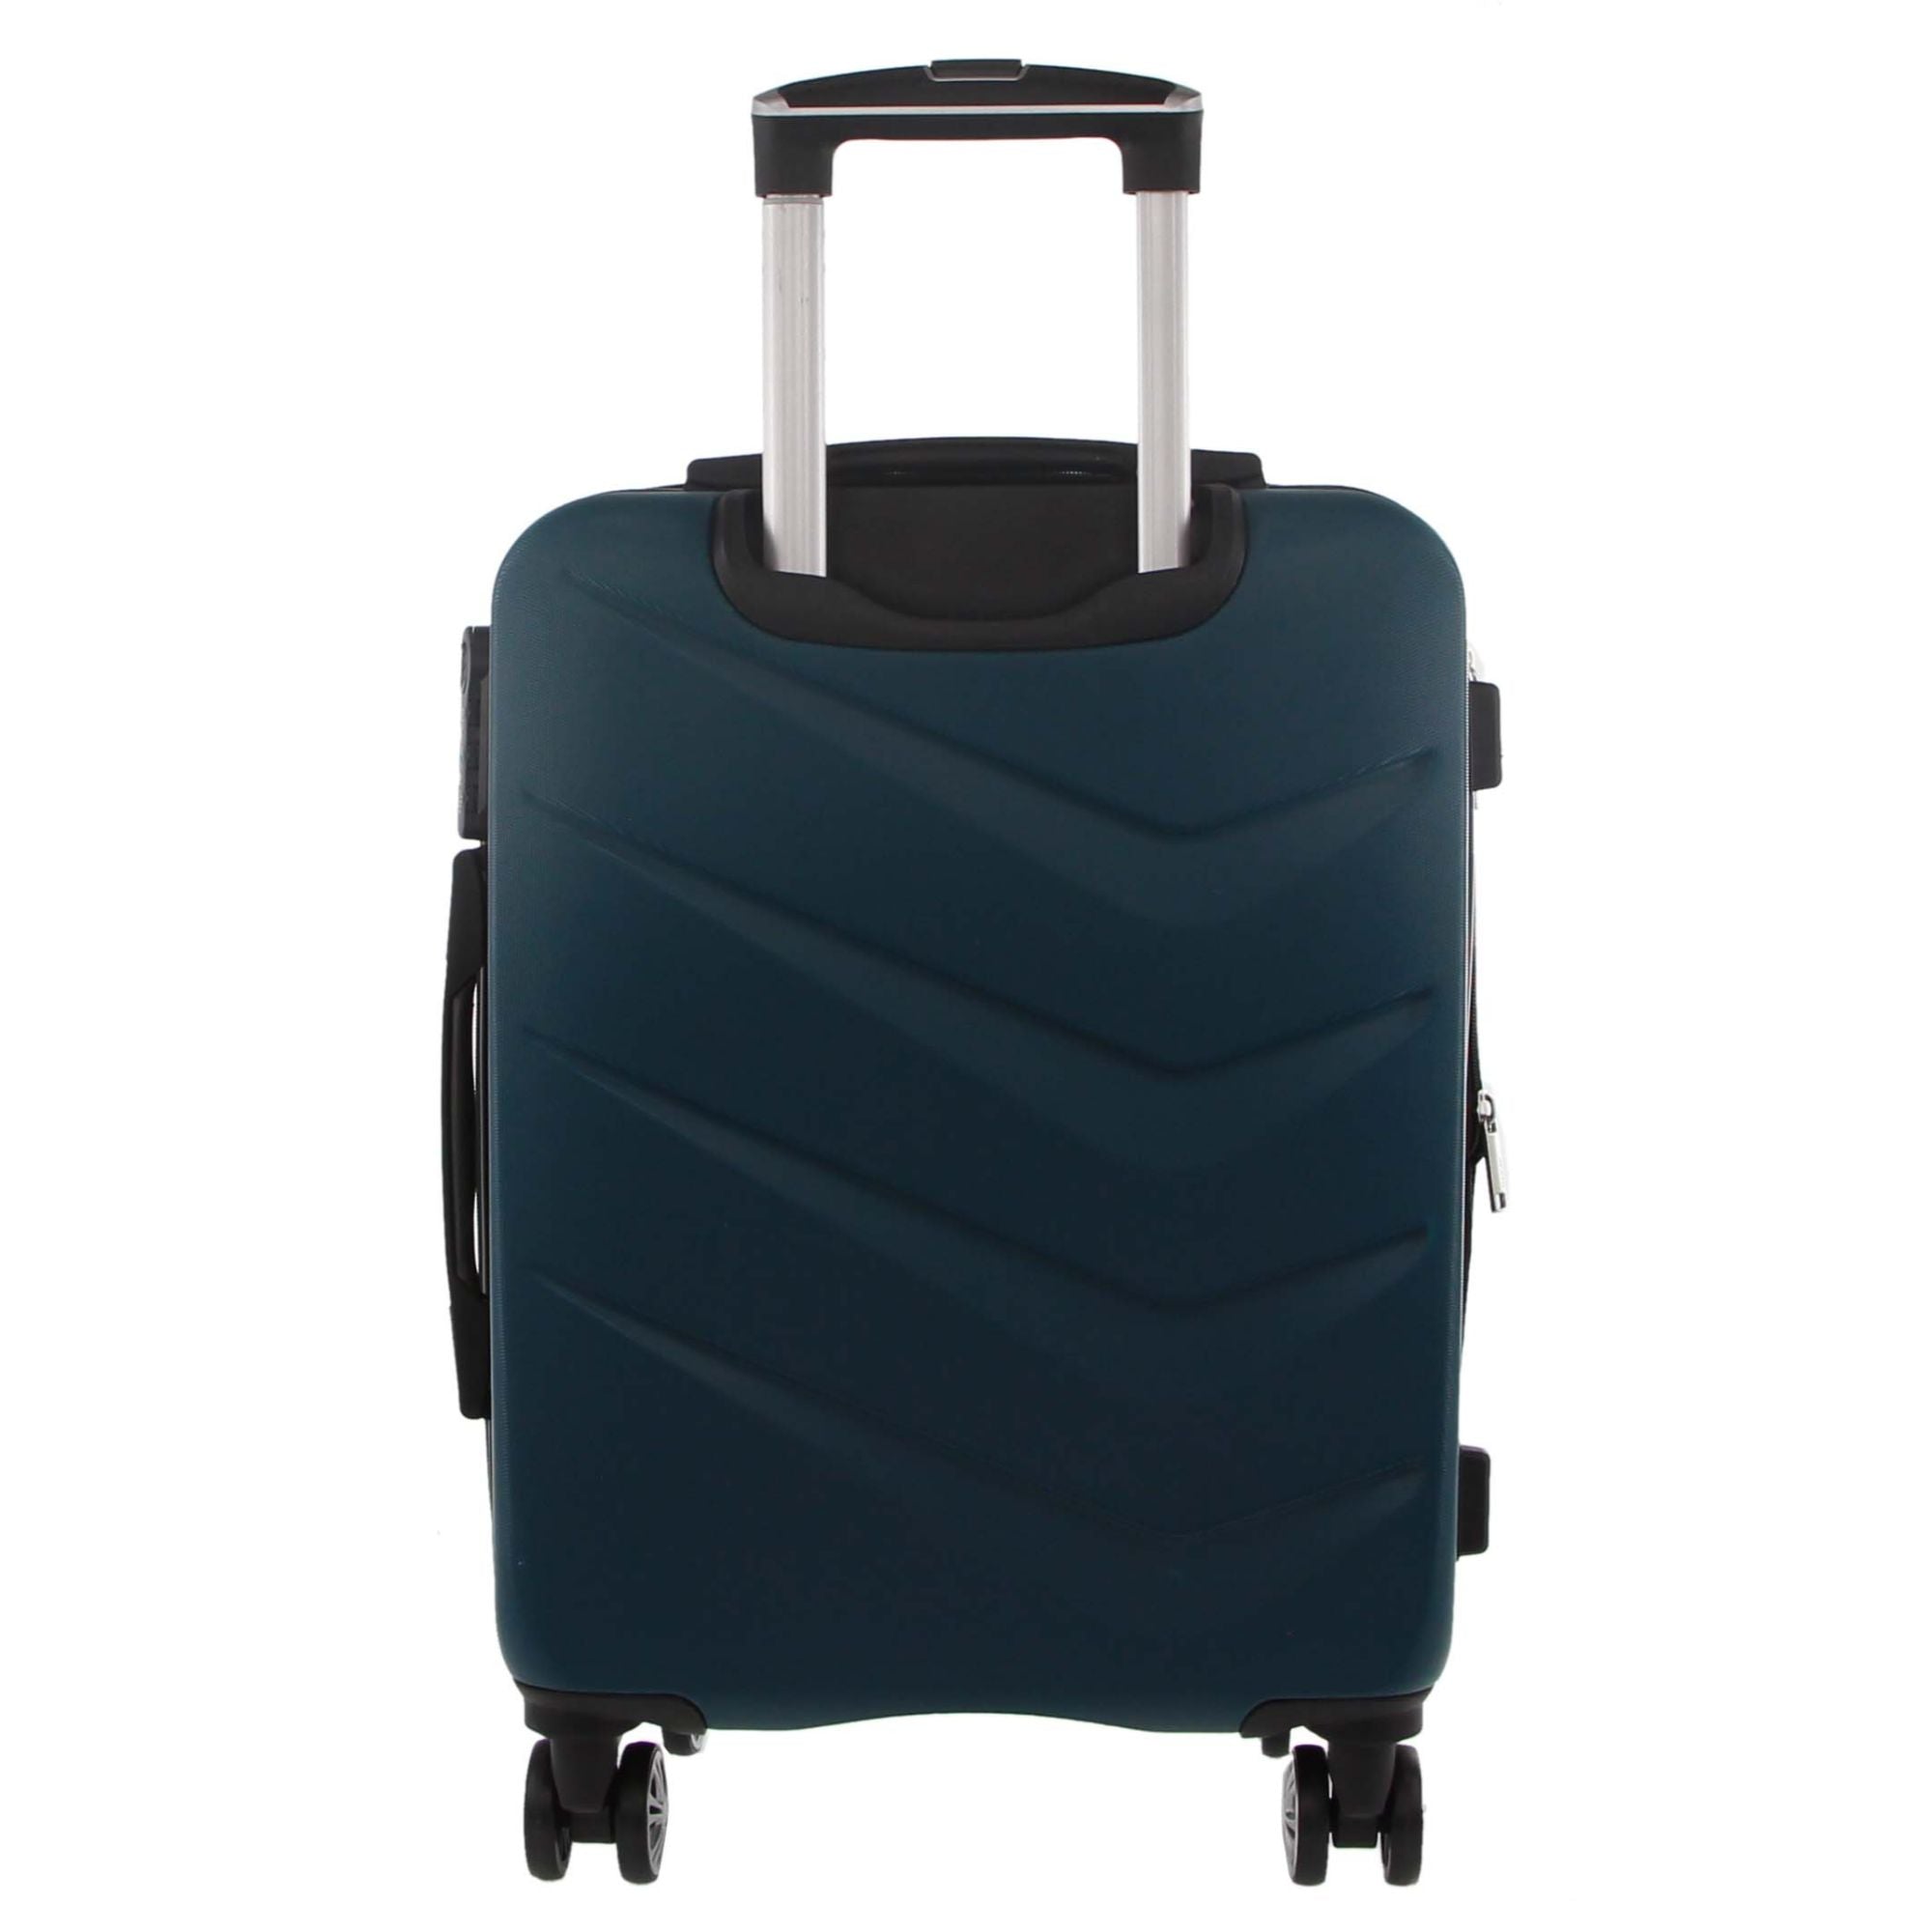 Pierre Cardin - PC3249 Small Hard Suitcase - Teal-4